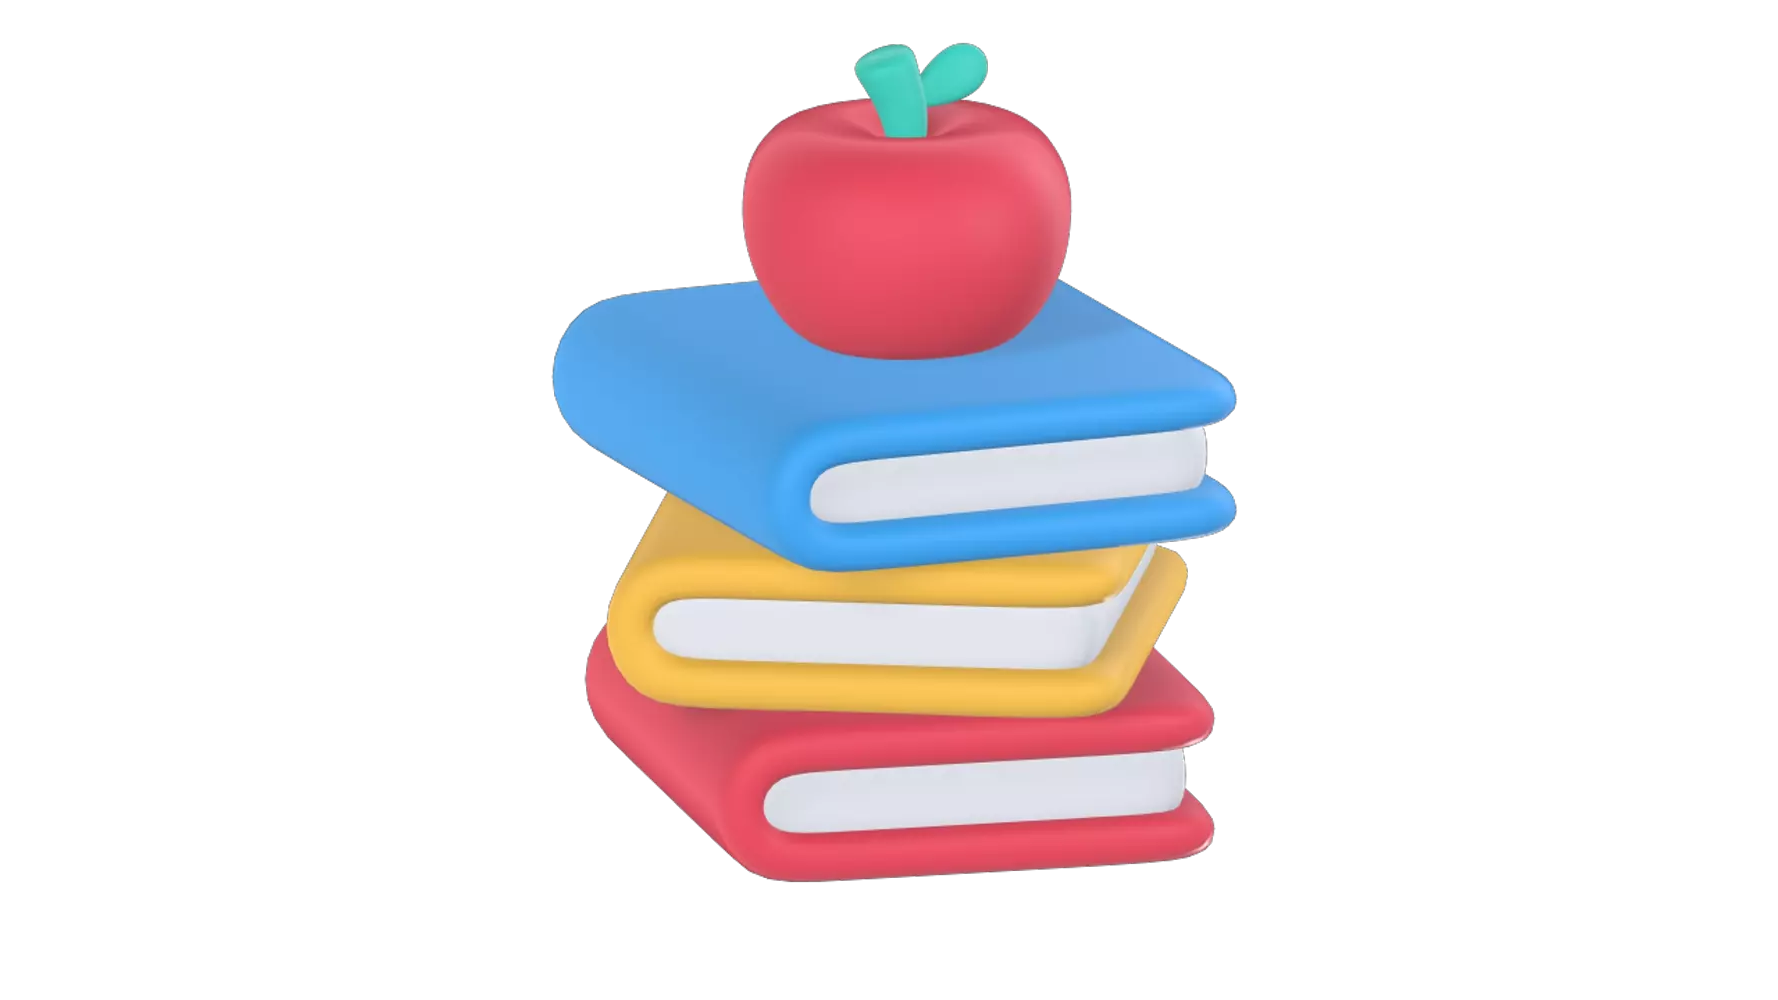 Books And Apple 3D Graphic